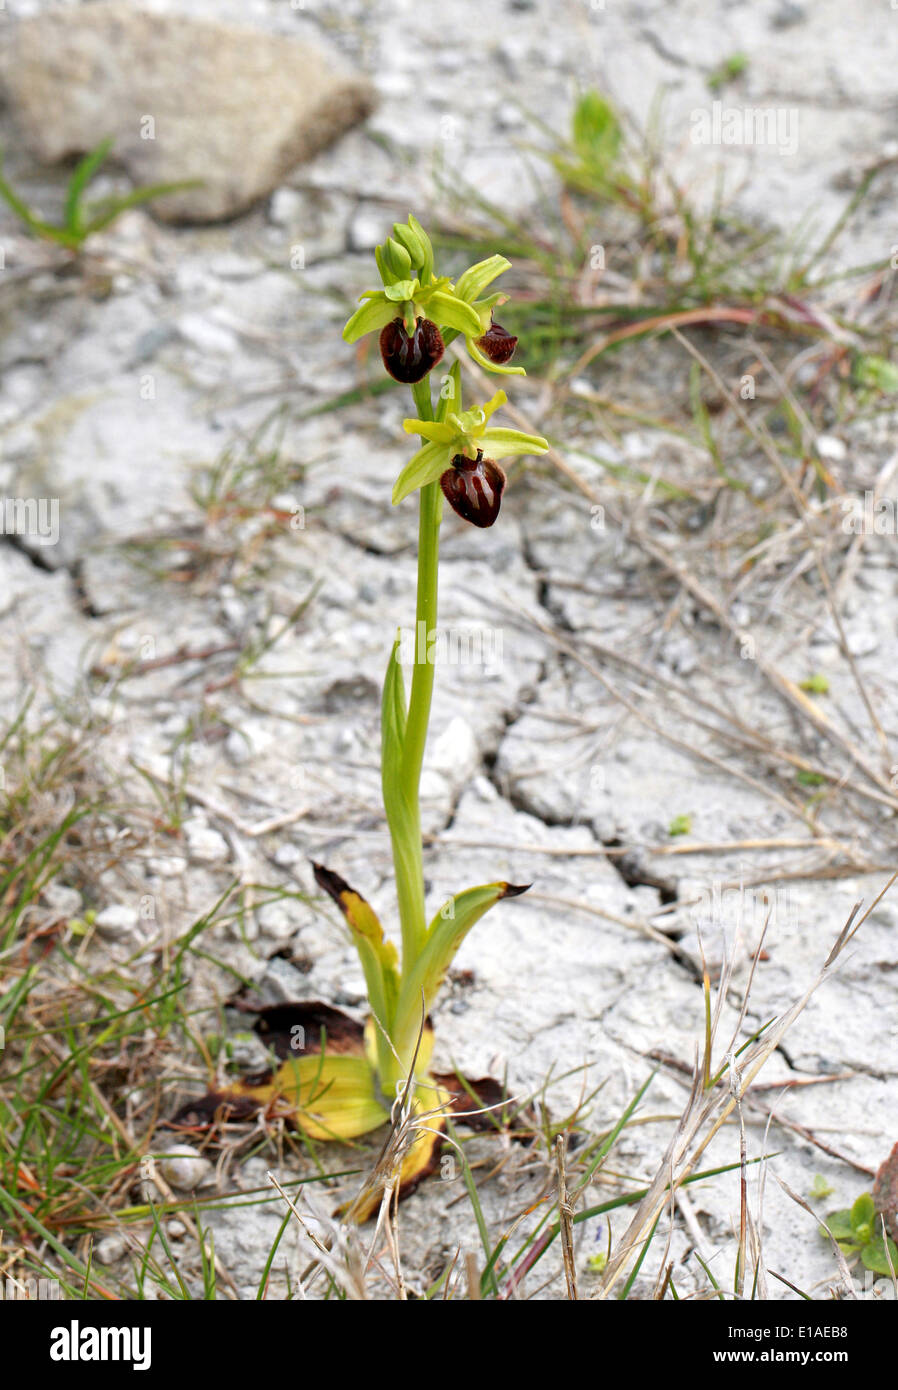 Early Spider Orchids, Ophrys sphegodes, Orchidaceae. Samphire Hoe, Kent. British Wild Flower, Regno Unito. Foto Stock